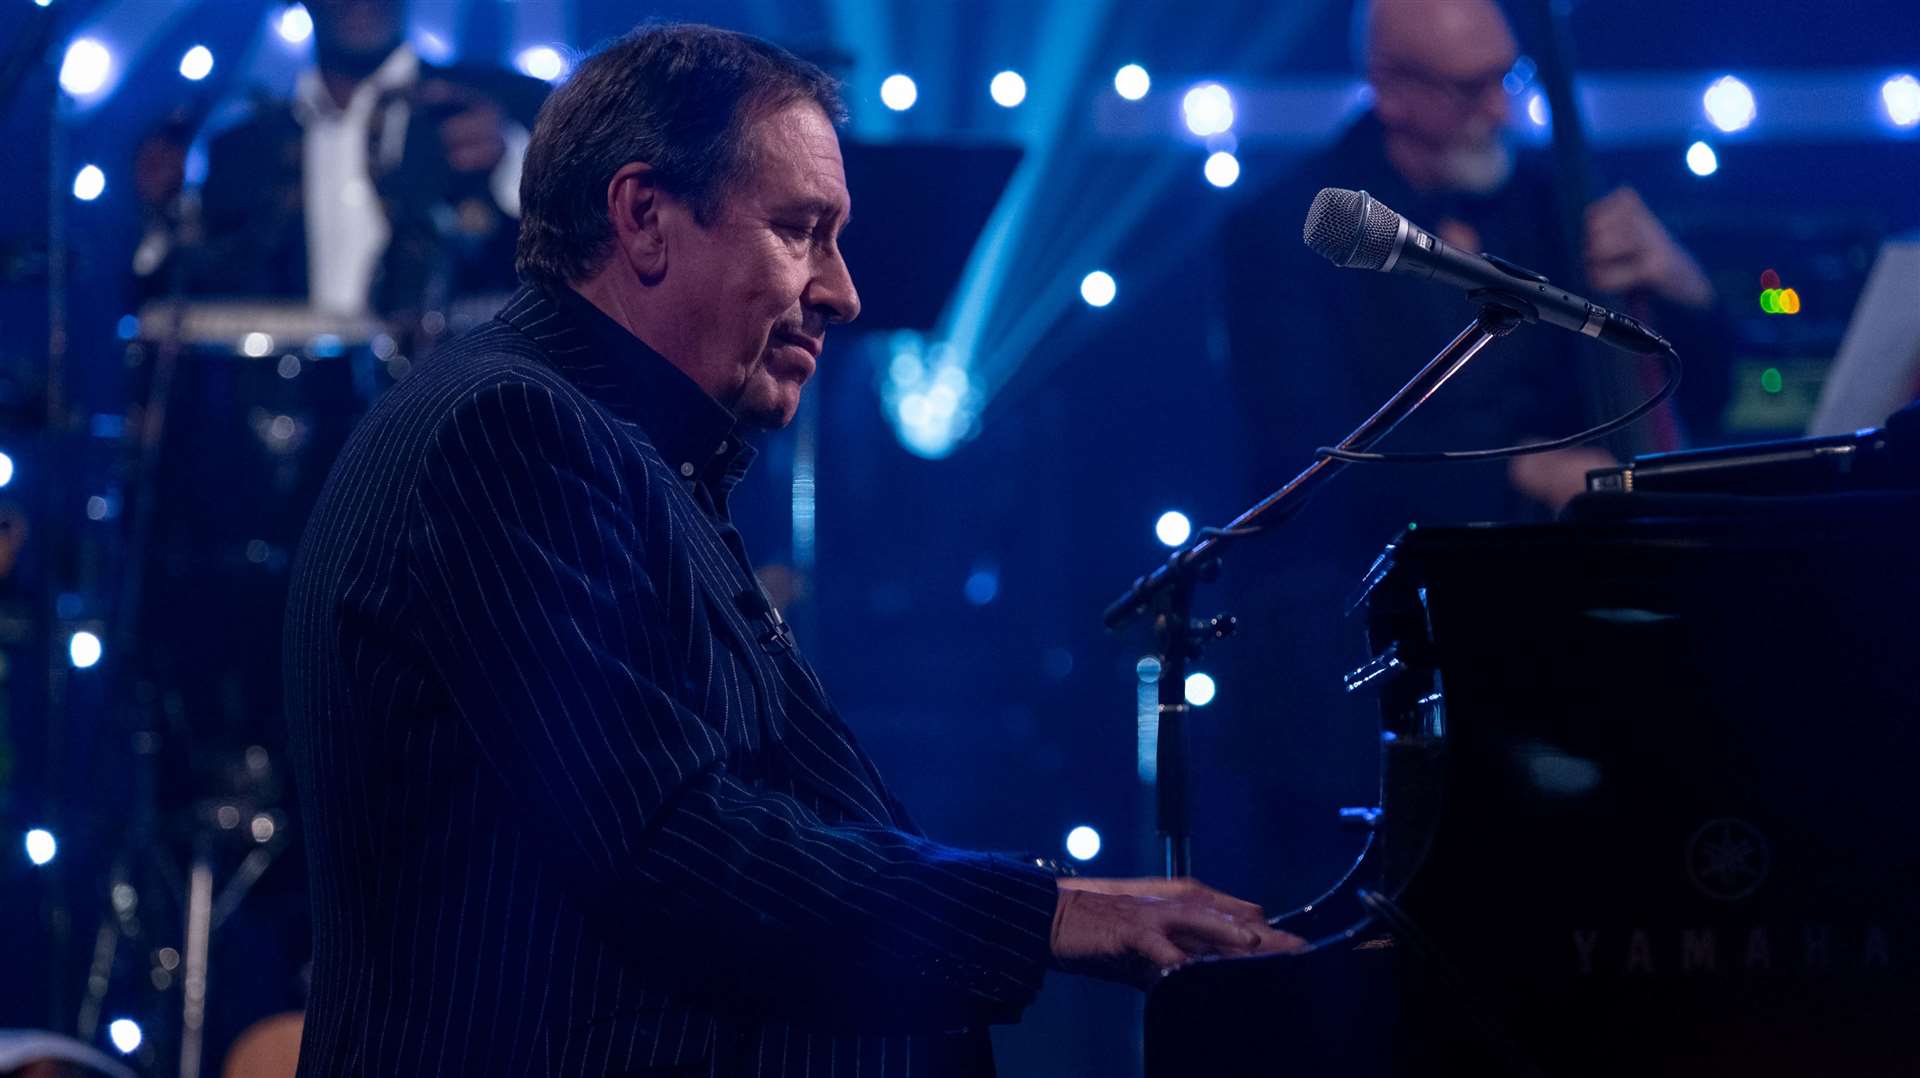 Jools’ Annual Hootenanny is a music show broadcast on the BBC every New Year’s Eve. Picture: BBC Studios / Michael Leckie